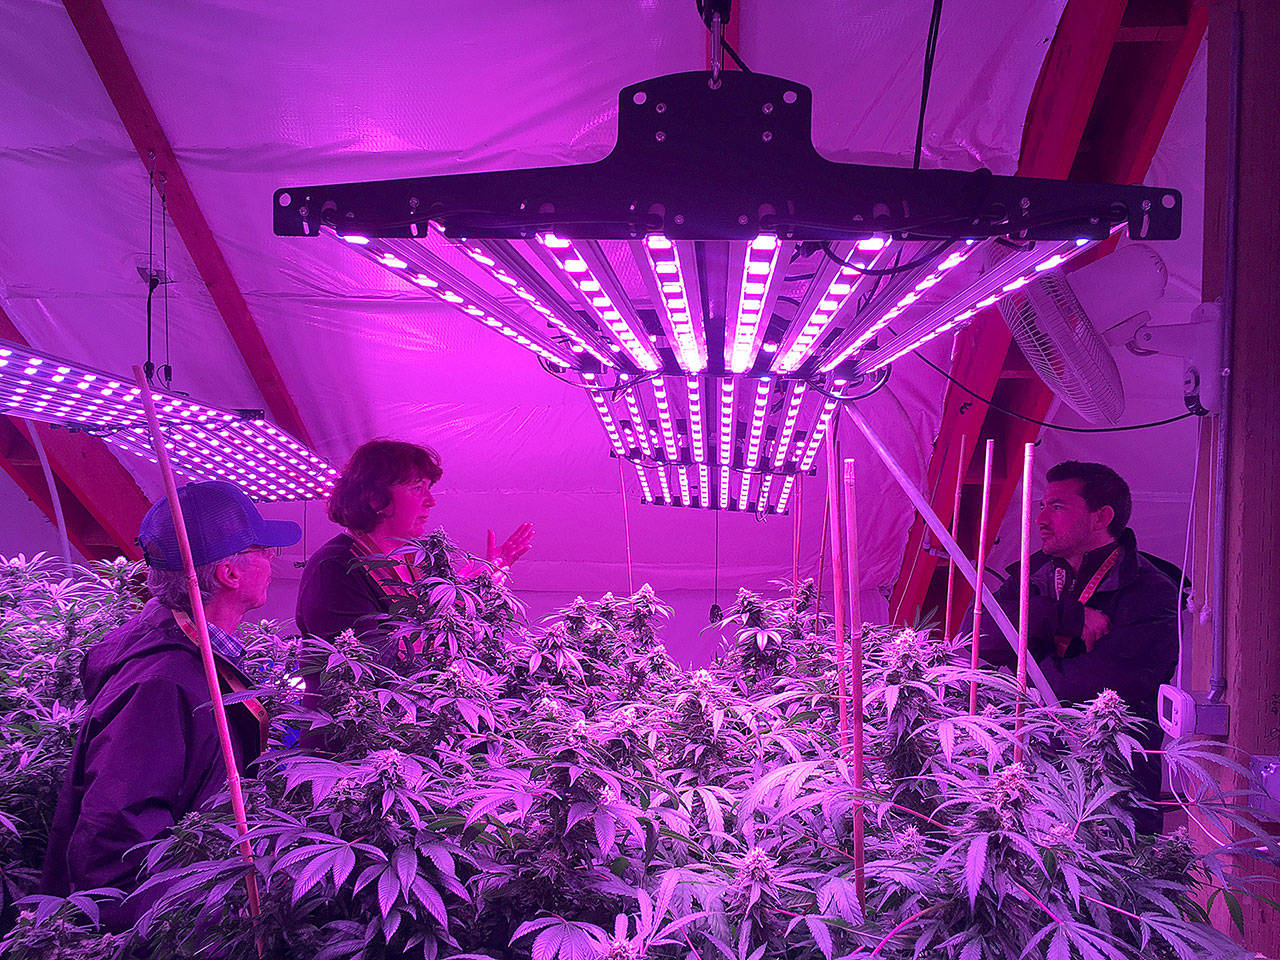 Susan Gress leads neurologist and prominent cannabis researcher Ethan Russo through her cannabis farm. Her business, Vashon Velvet, closed last month (Courtesy Photo).